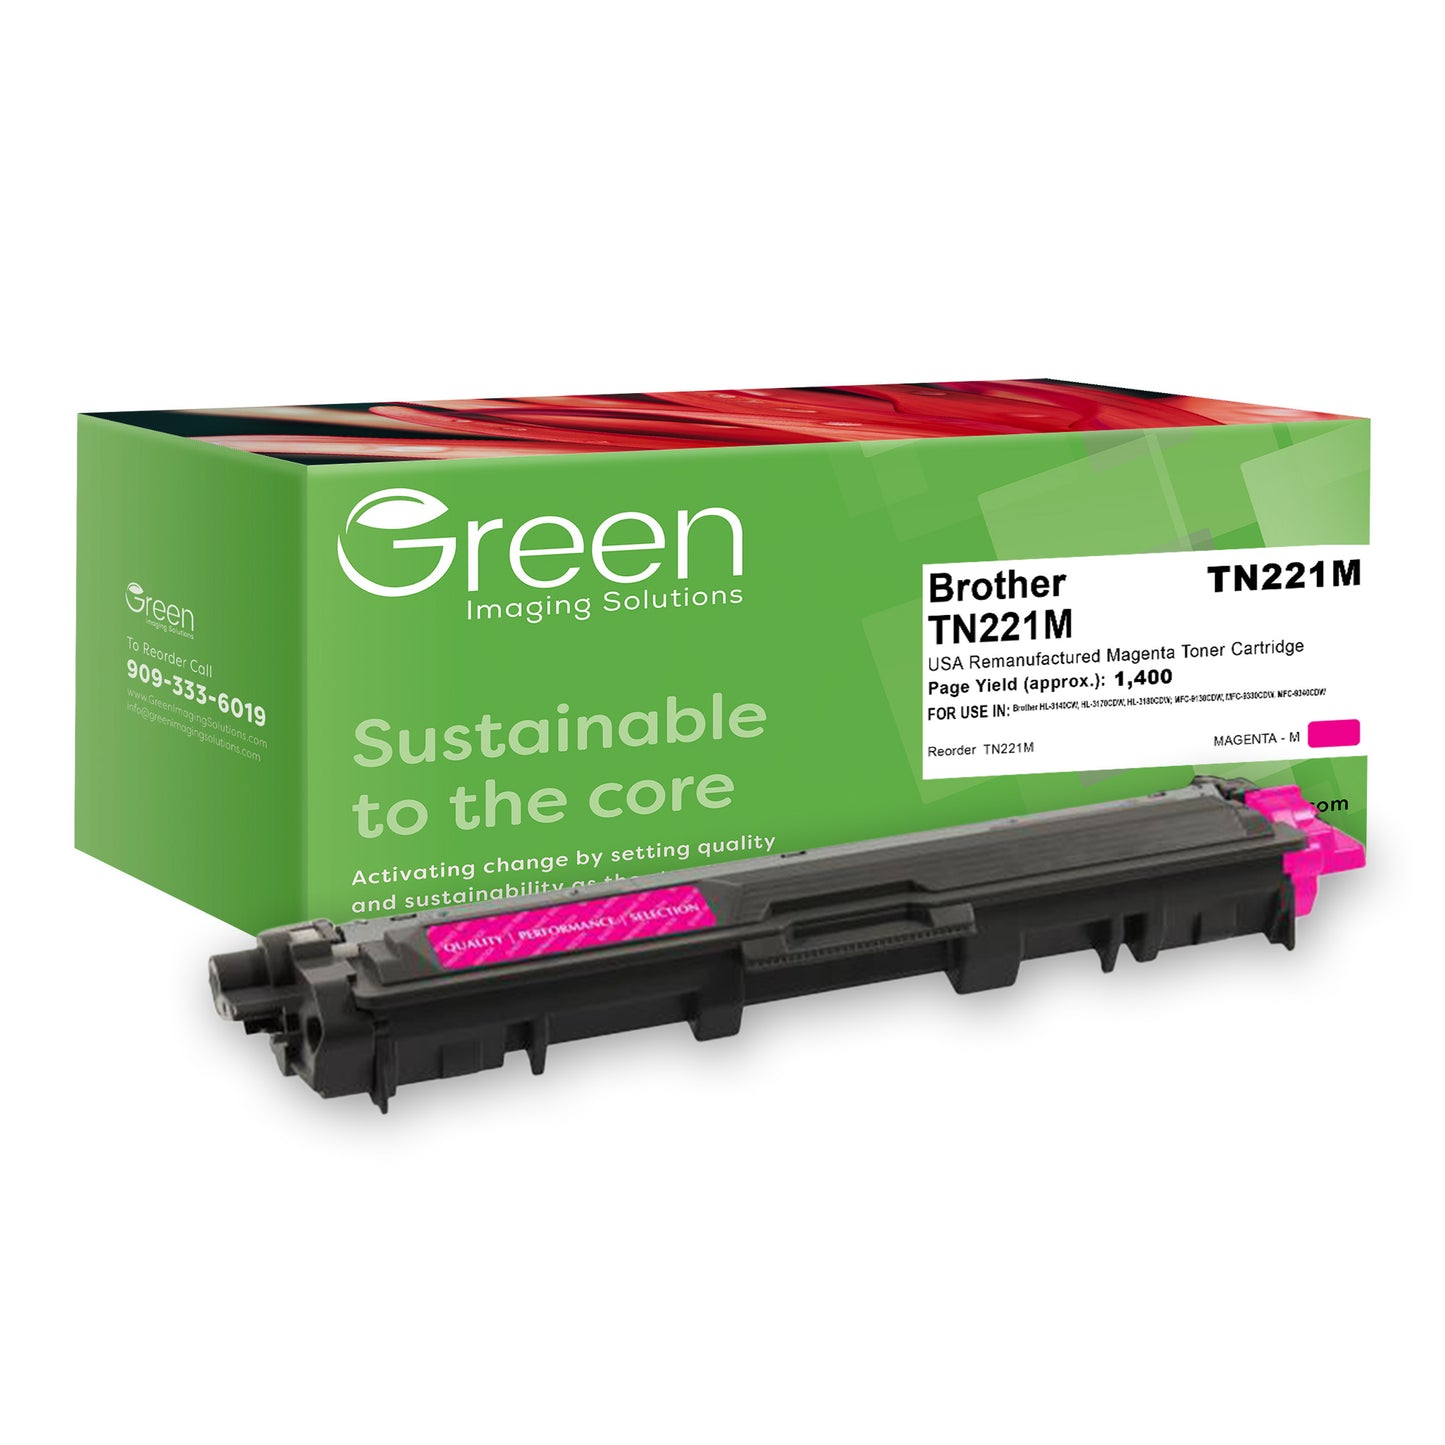 Green Imaging Solutions USA Remanufactured Magenta Toner Cartridge for Brother TN221